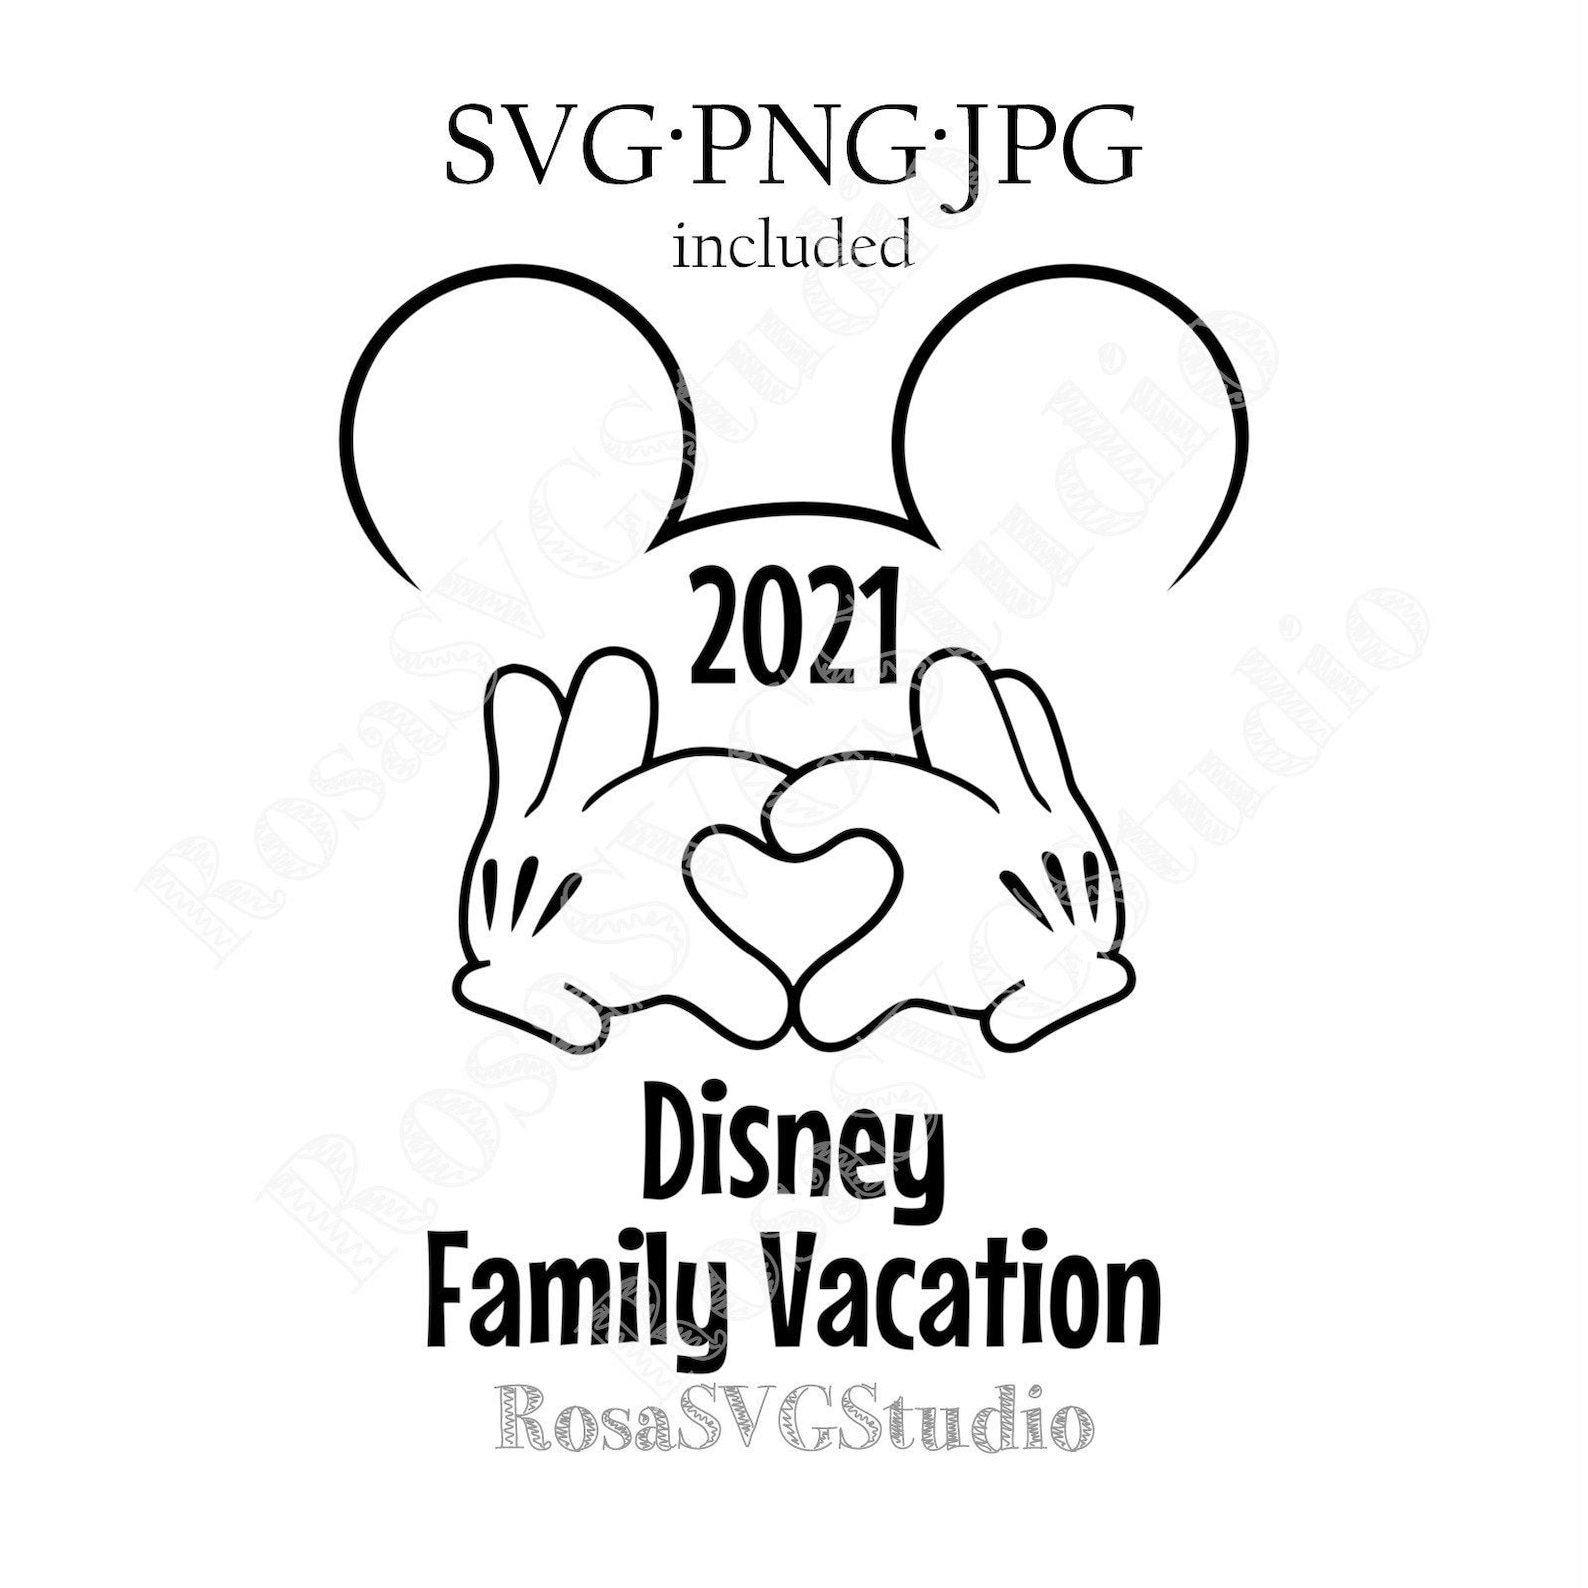 Disney Family Vacation 2021 svg. Great for use as cutting | Etsy